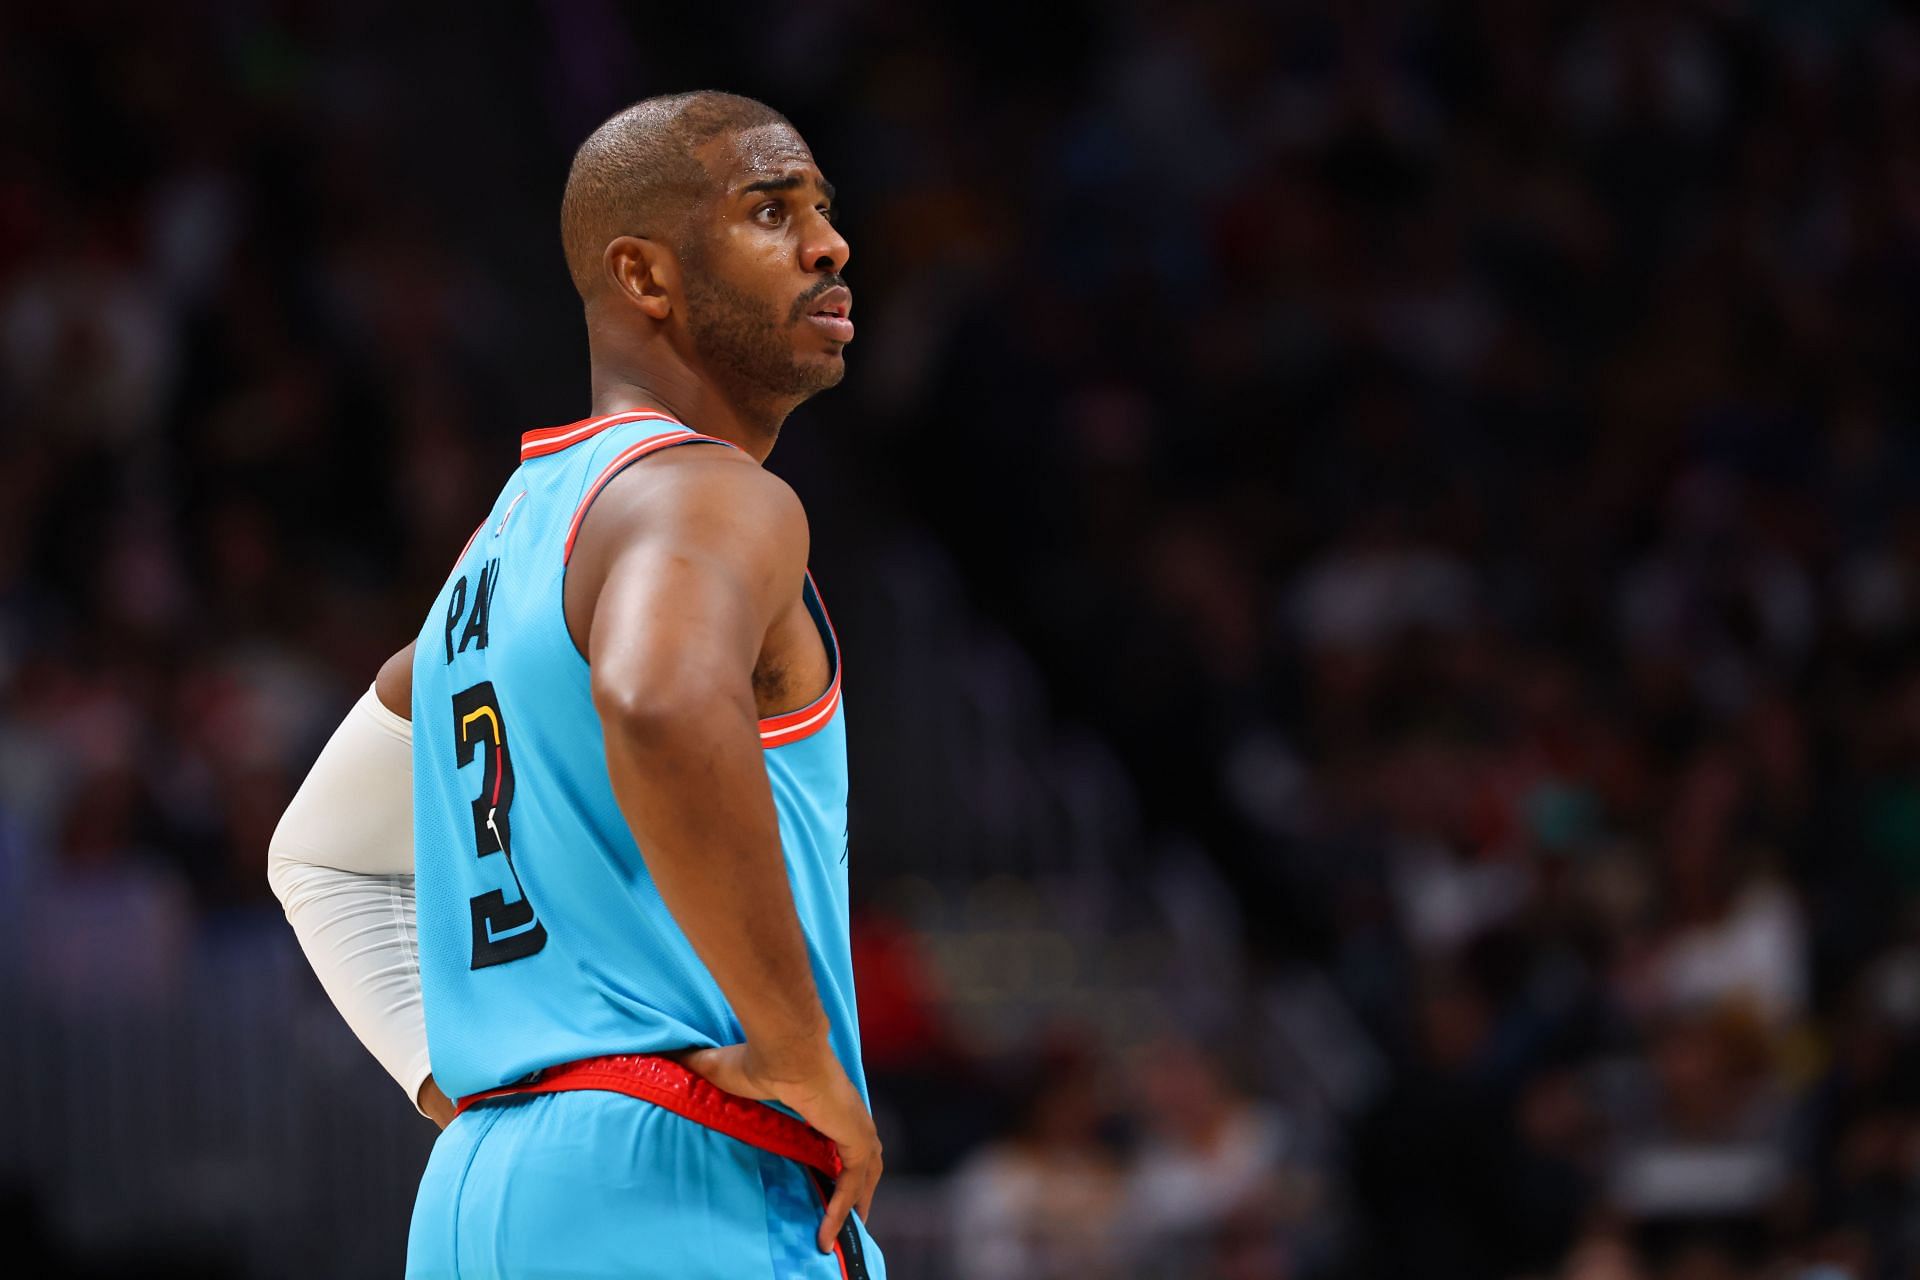 Chris Paul blasts Scott Foster, and the divide between NBA players and refs  widens